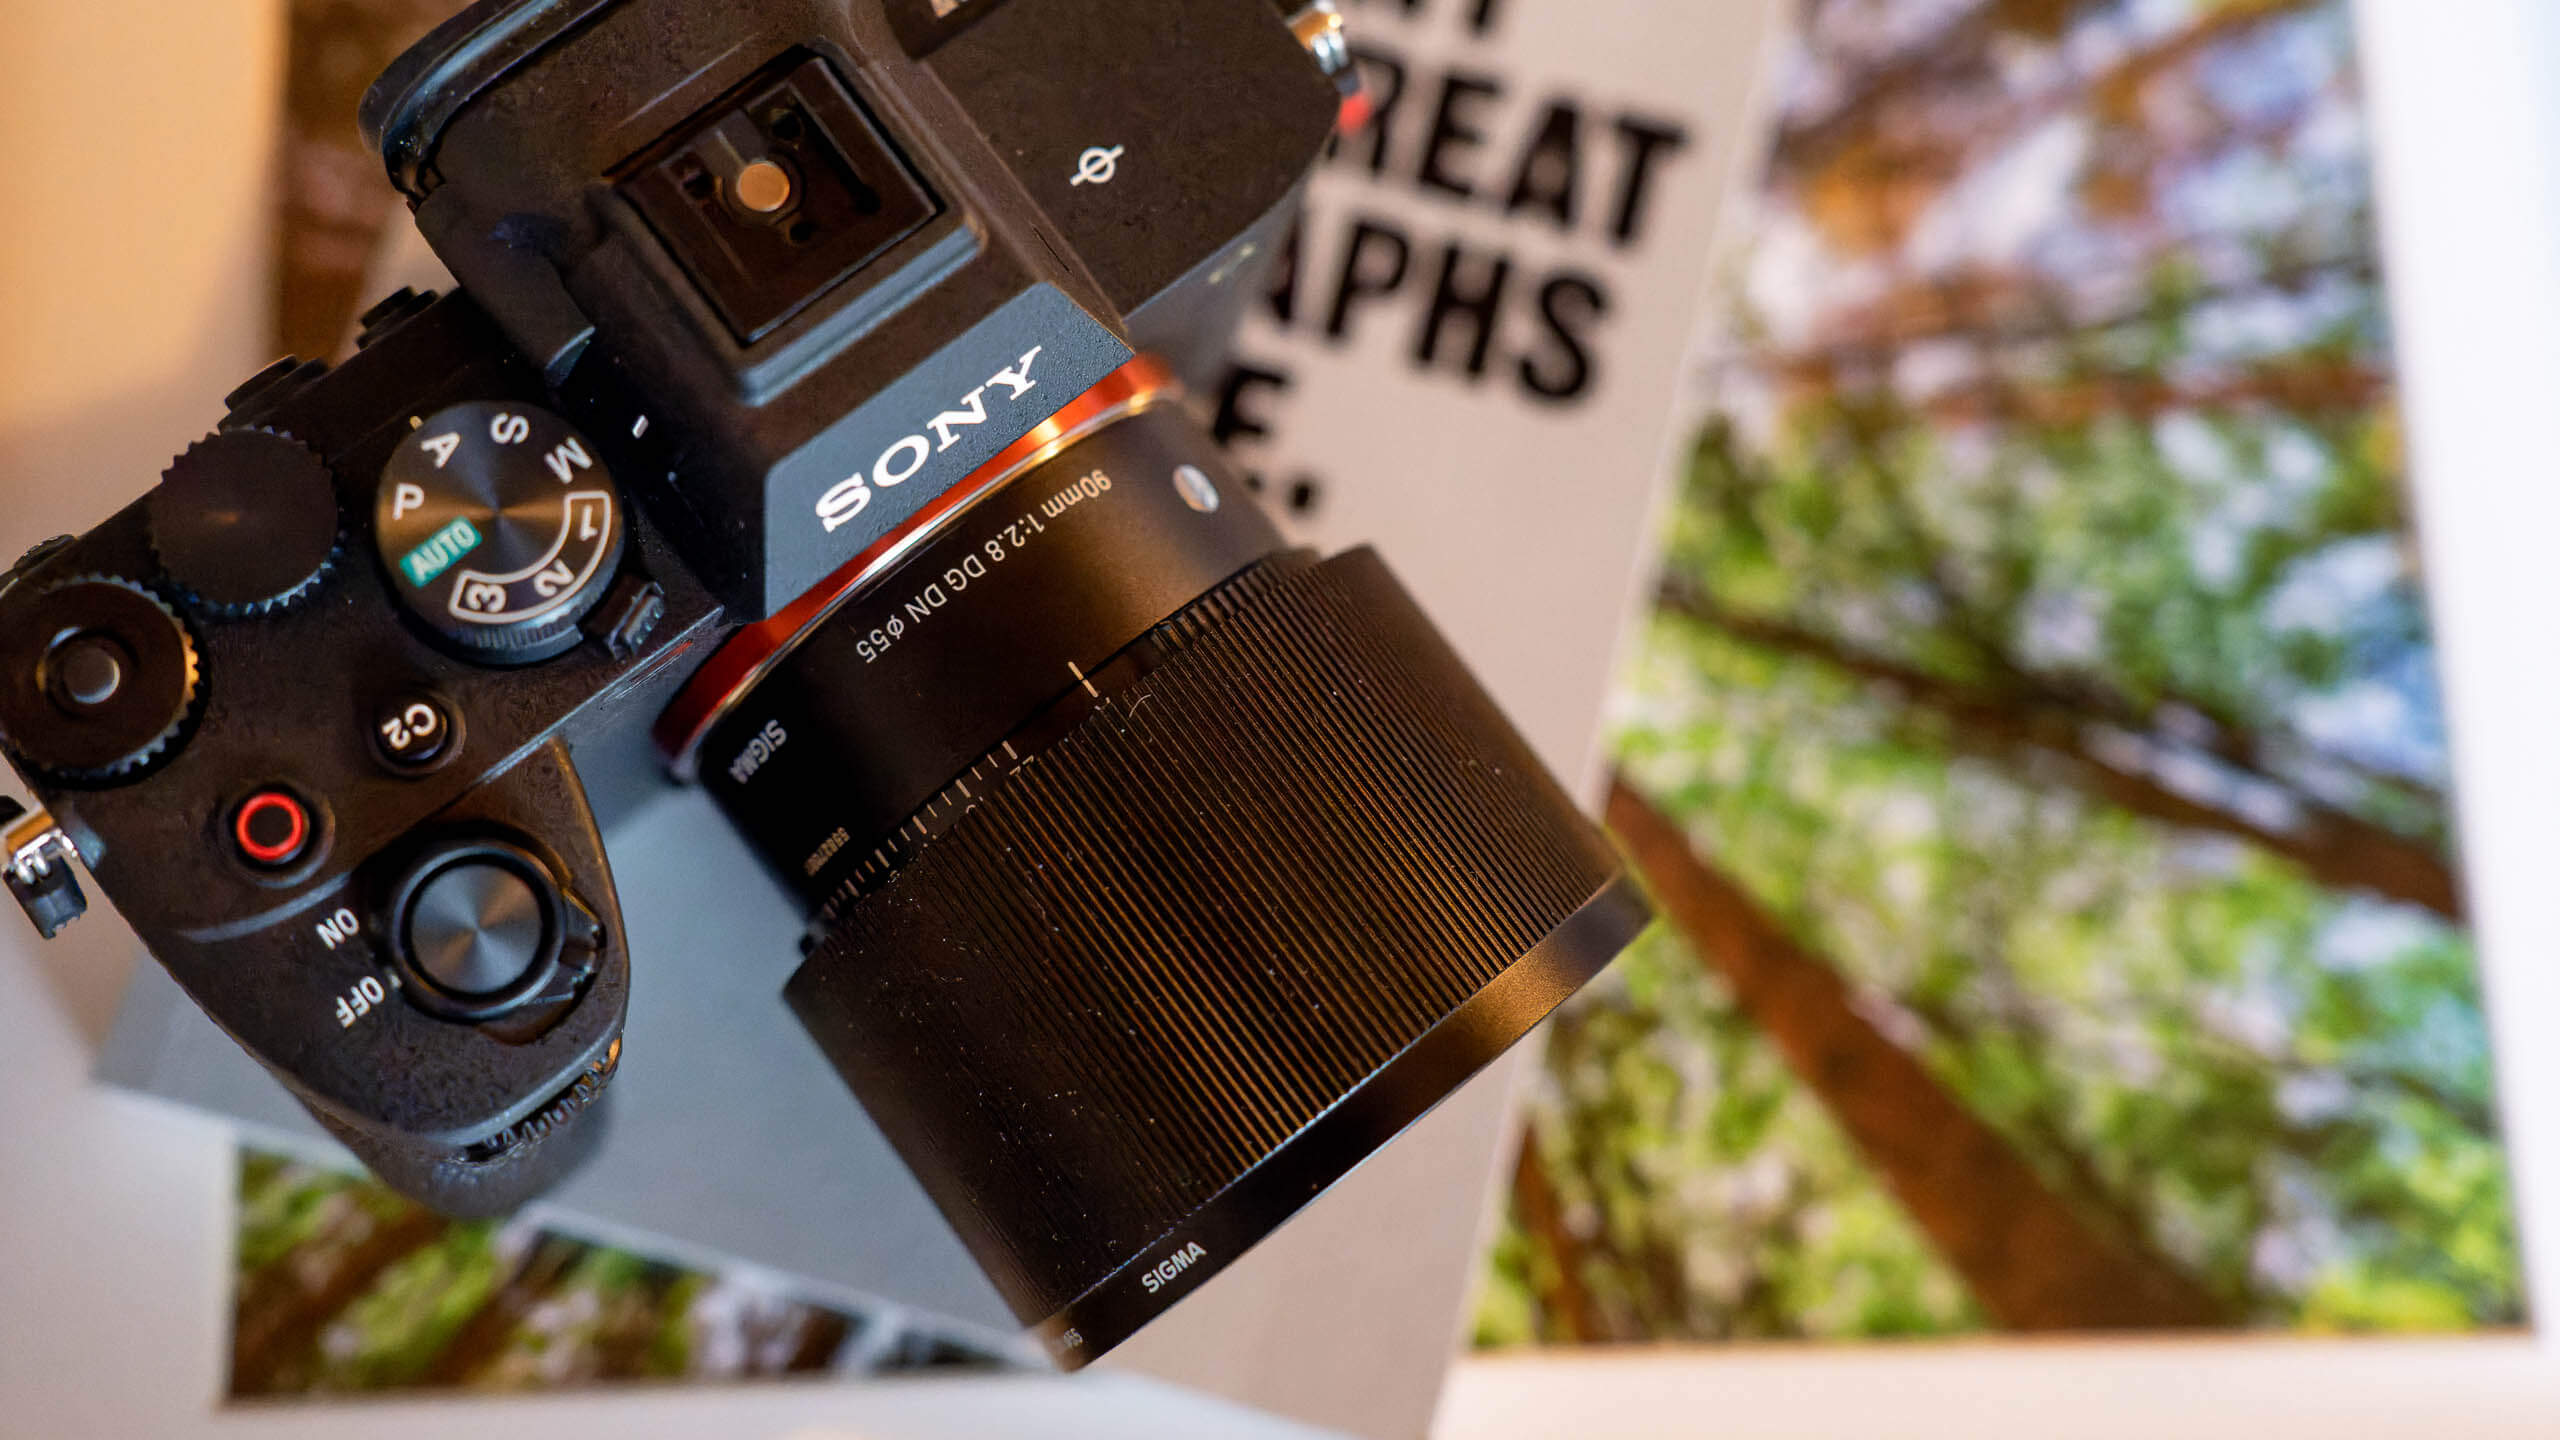 Sigma 90mm f/2.8 DG DN review: In a saturated field, does the 90mm